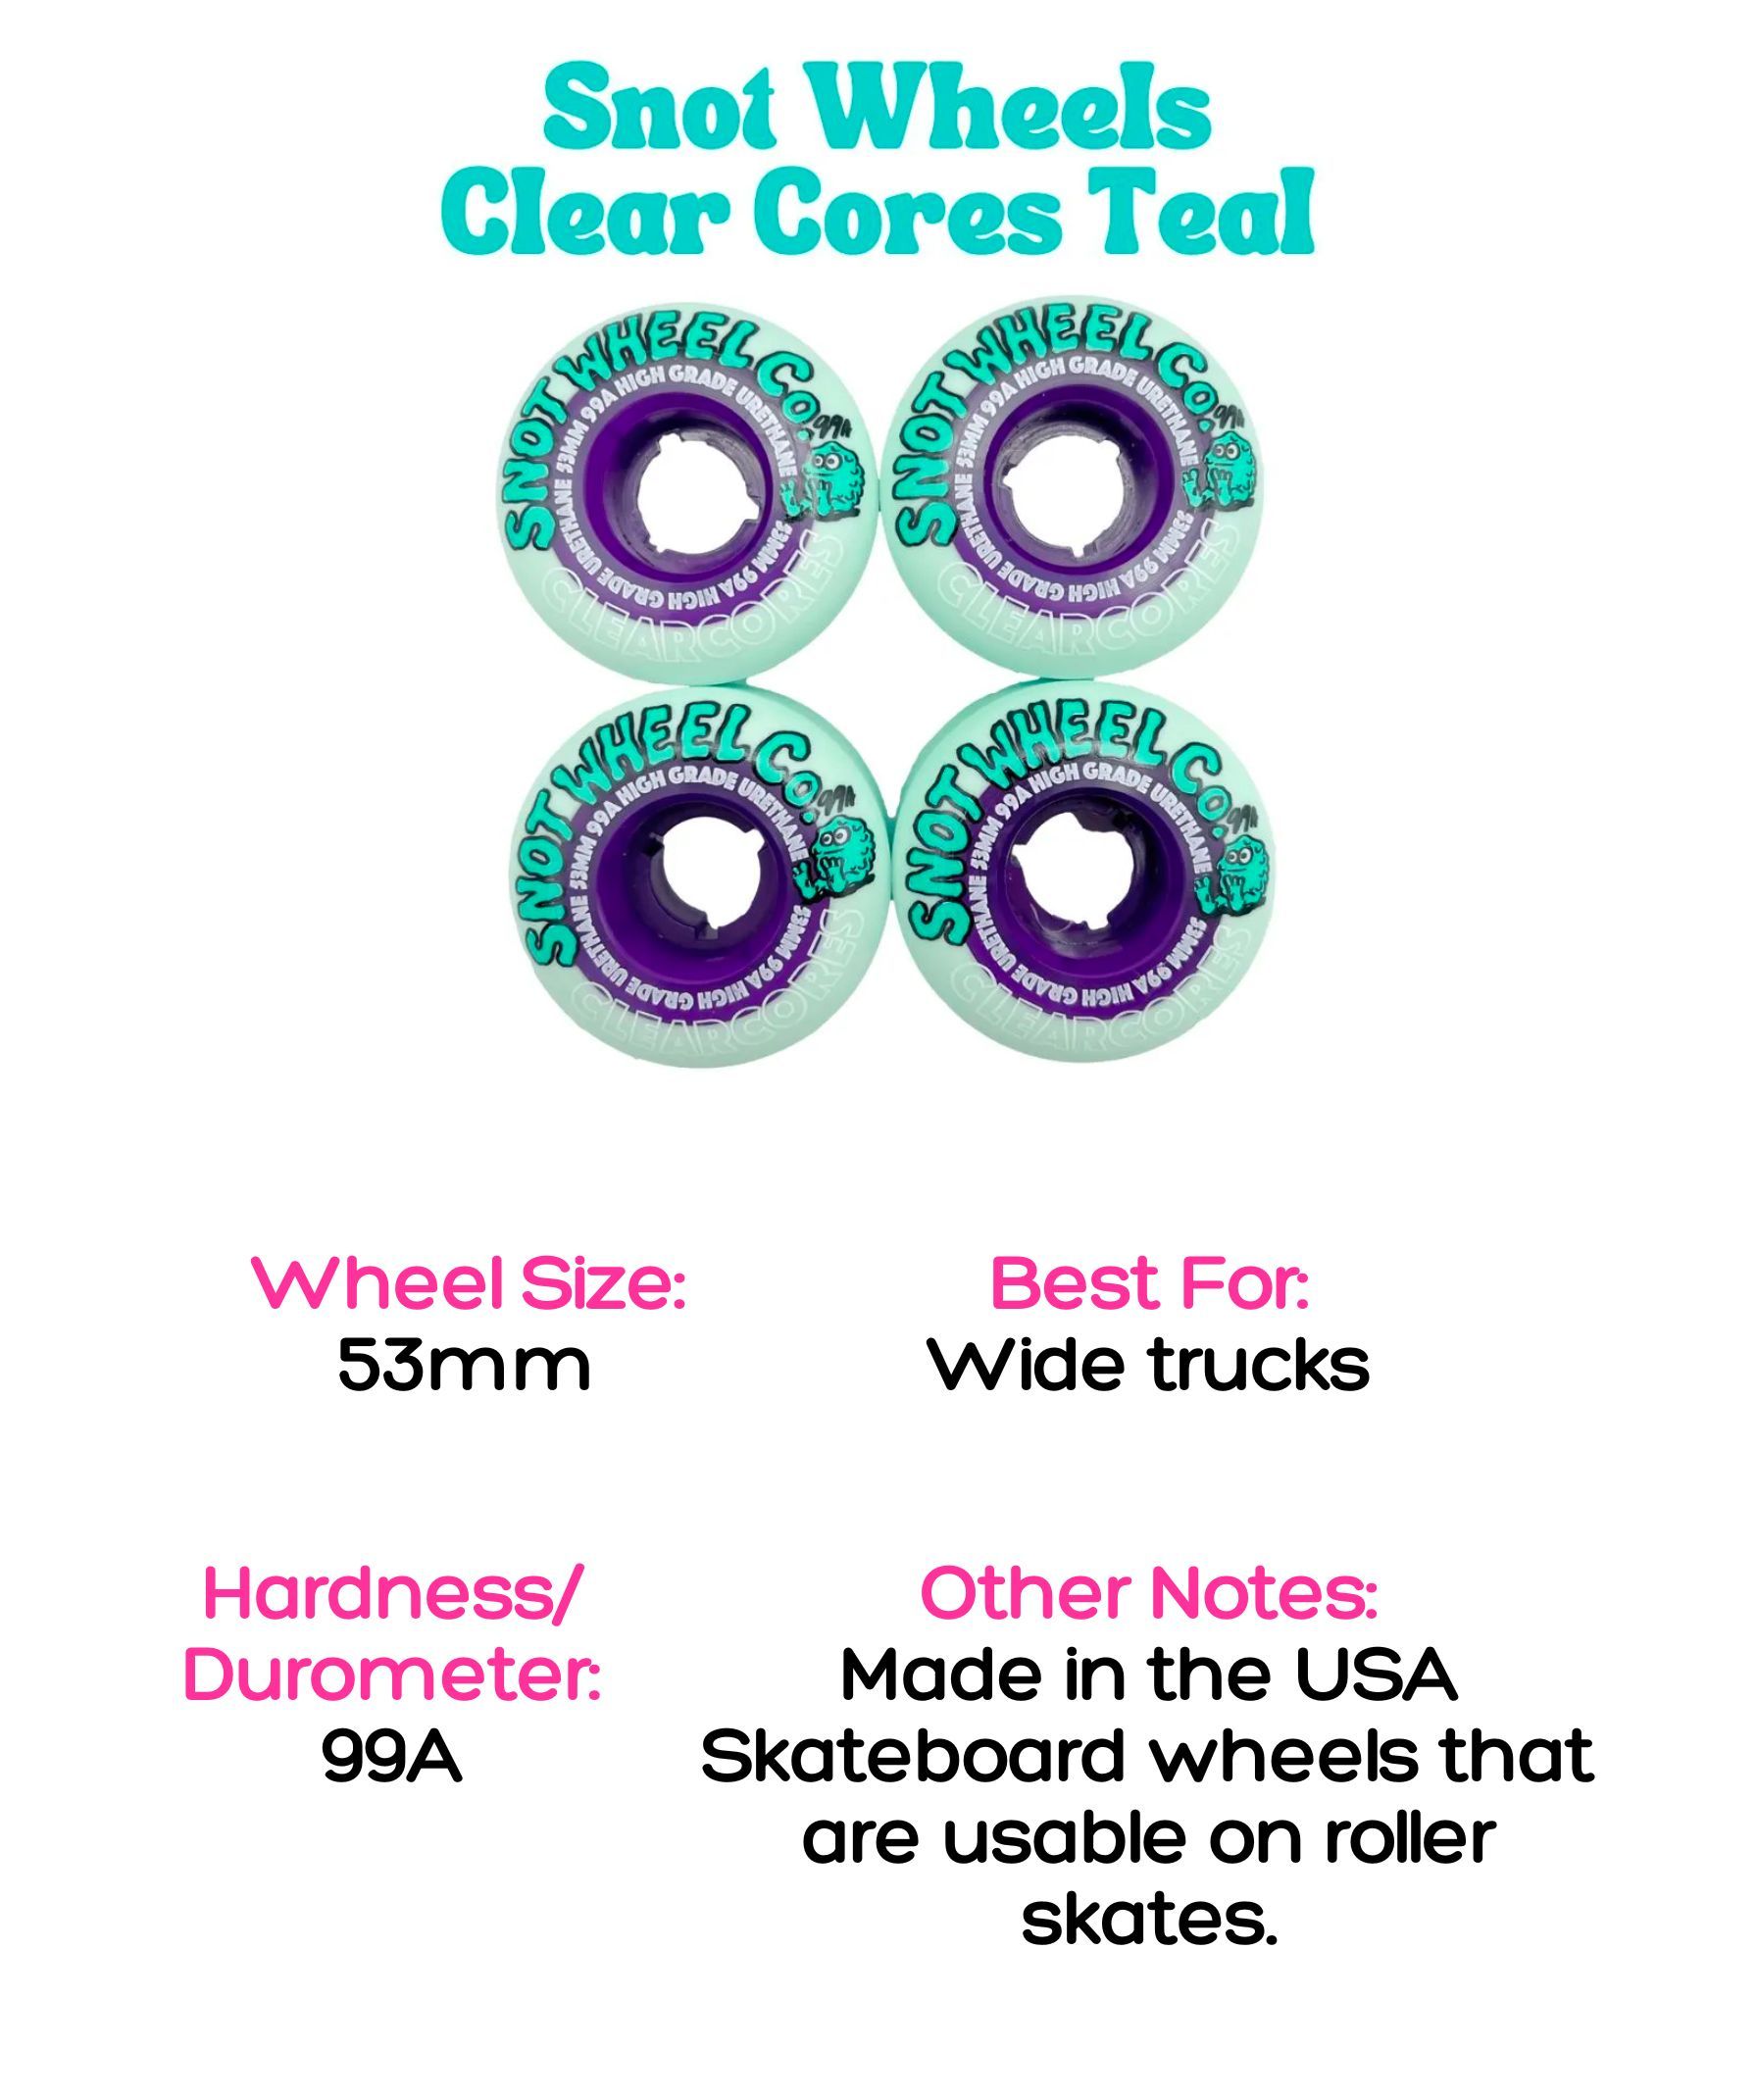 snot wheels clear cores teal, 53mm, 99A, best for wide trucks, made in the USA, skateboard wheels that are usable on roller skates